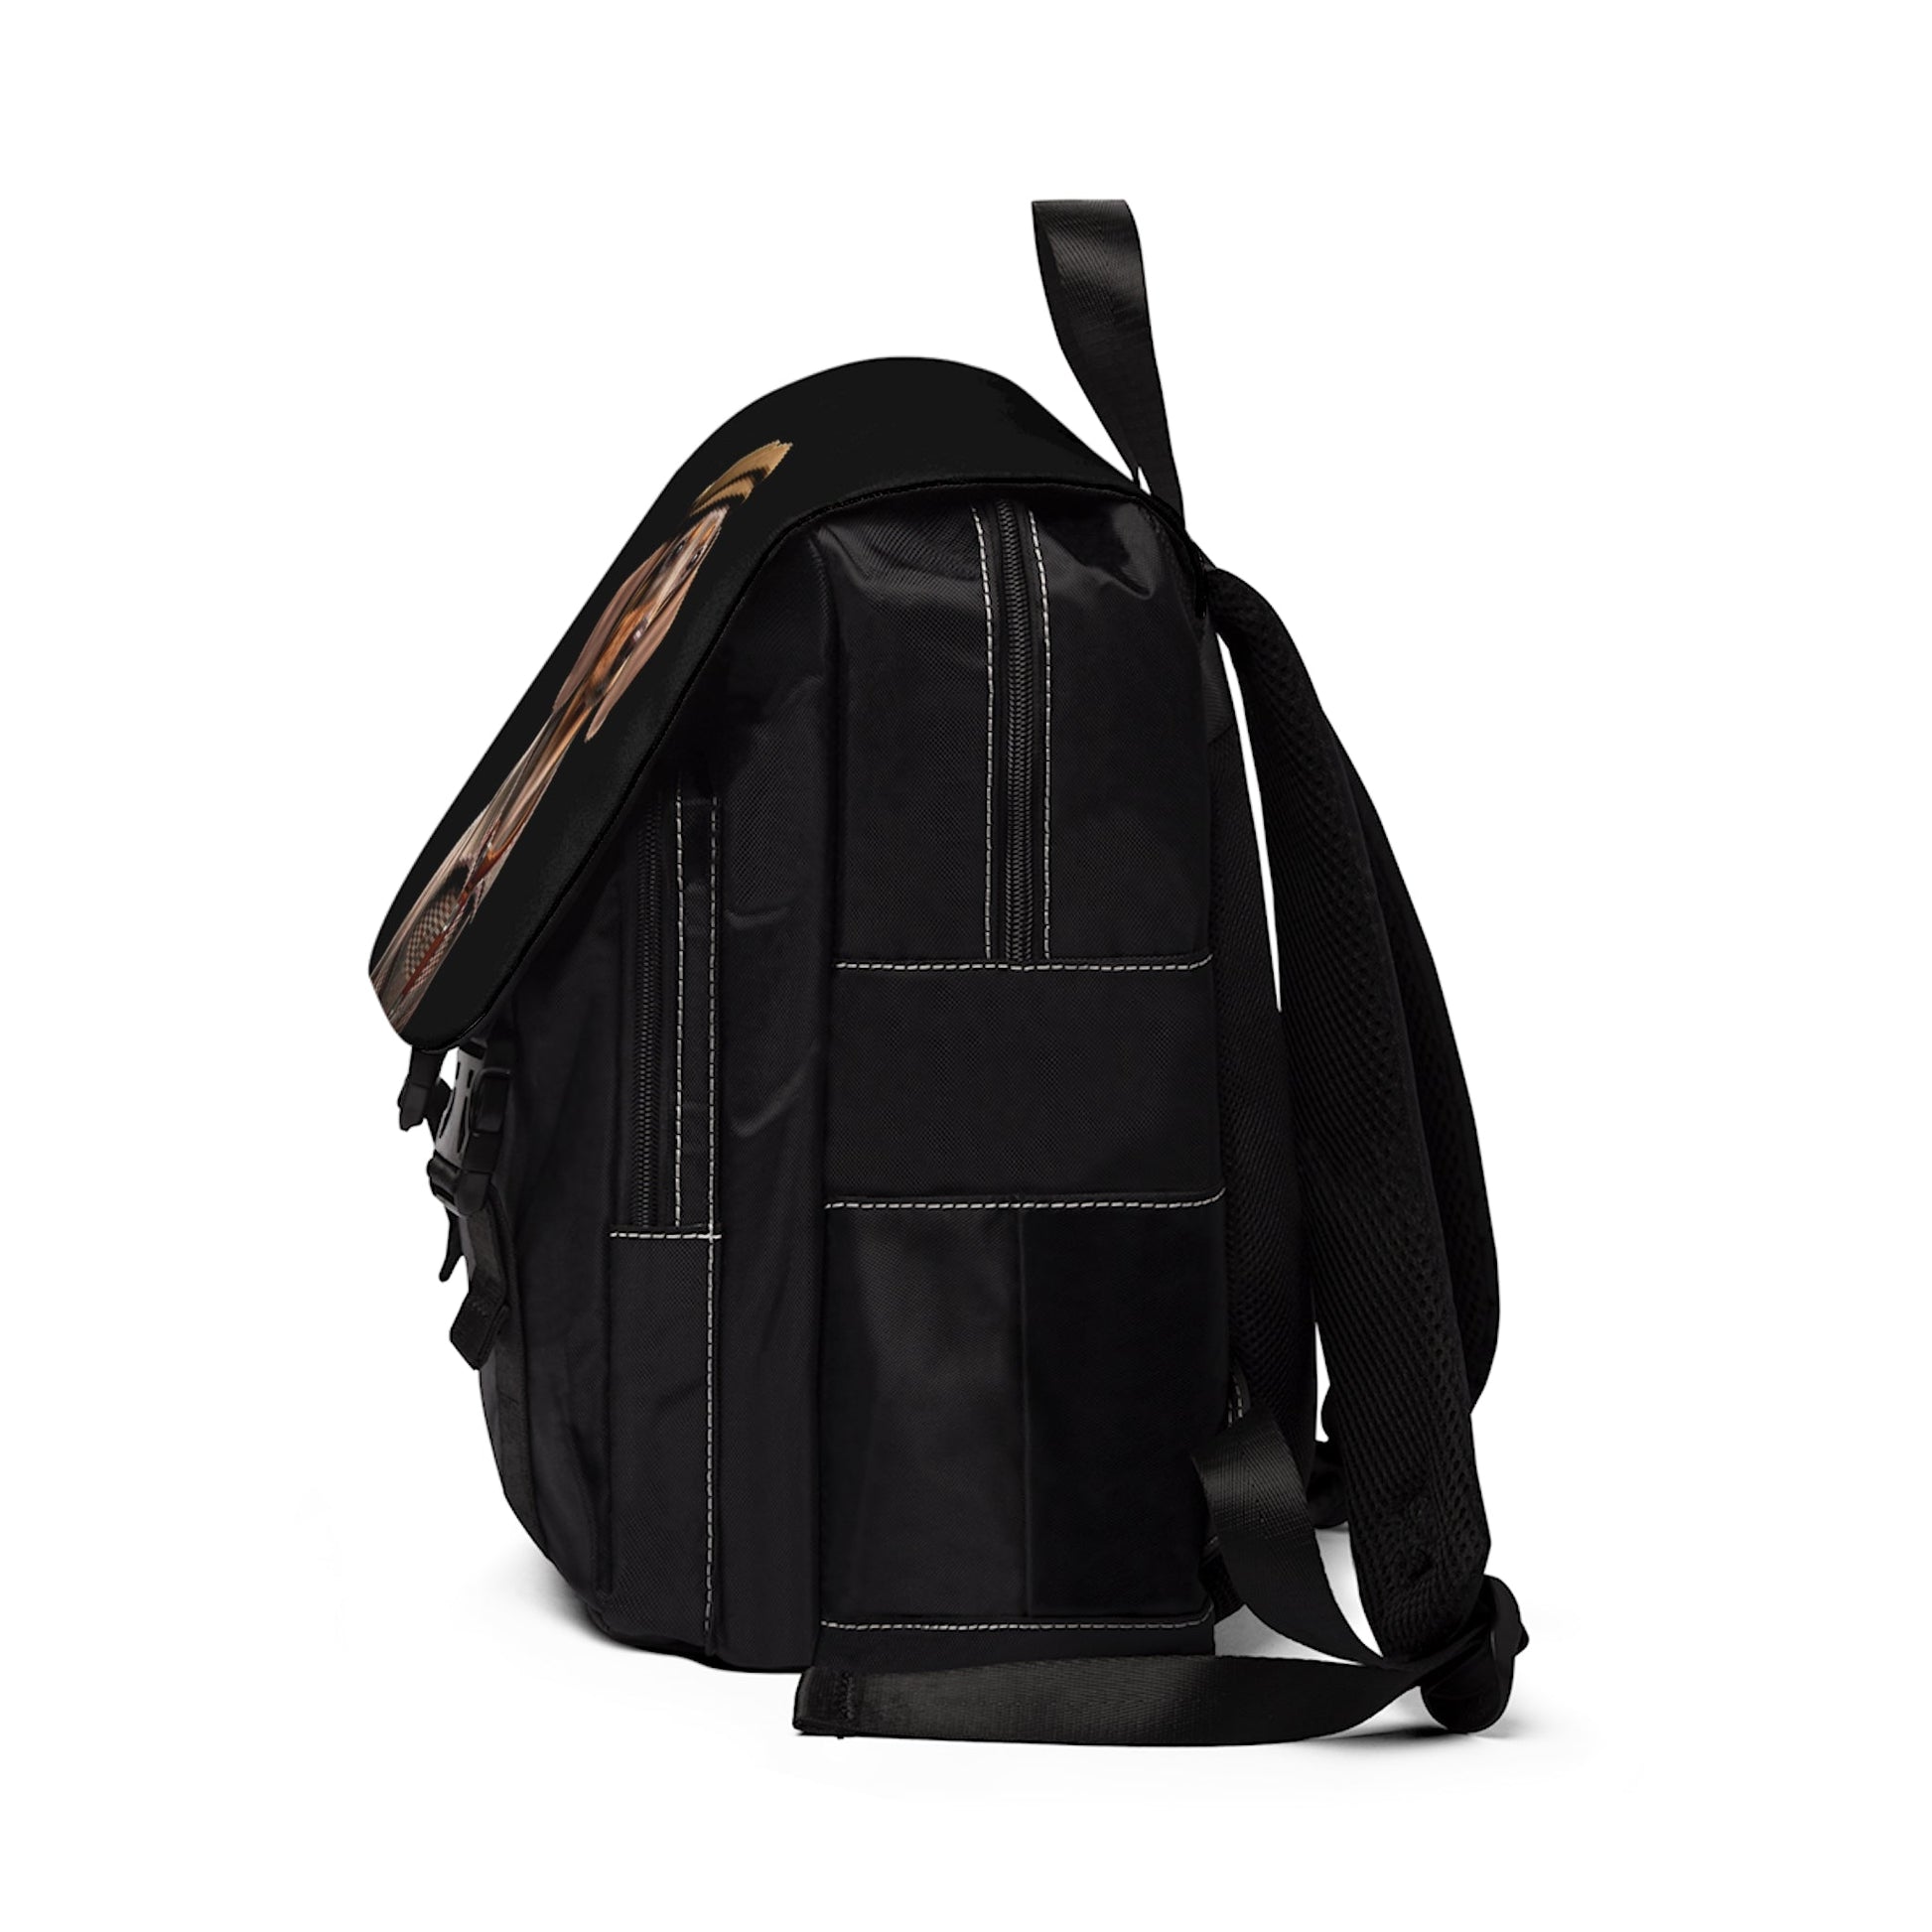 DONNY : Unisex Casual Shoulder Backpack - Shaggy Chic